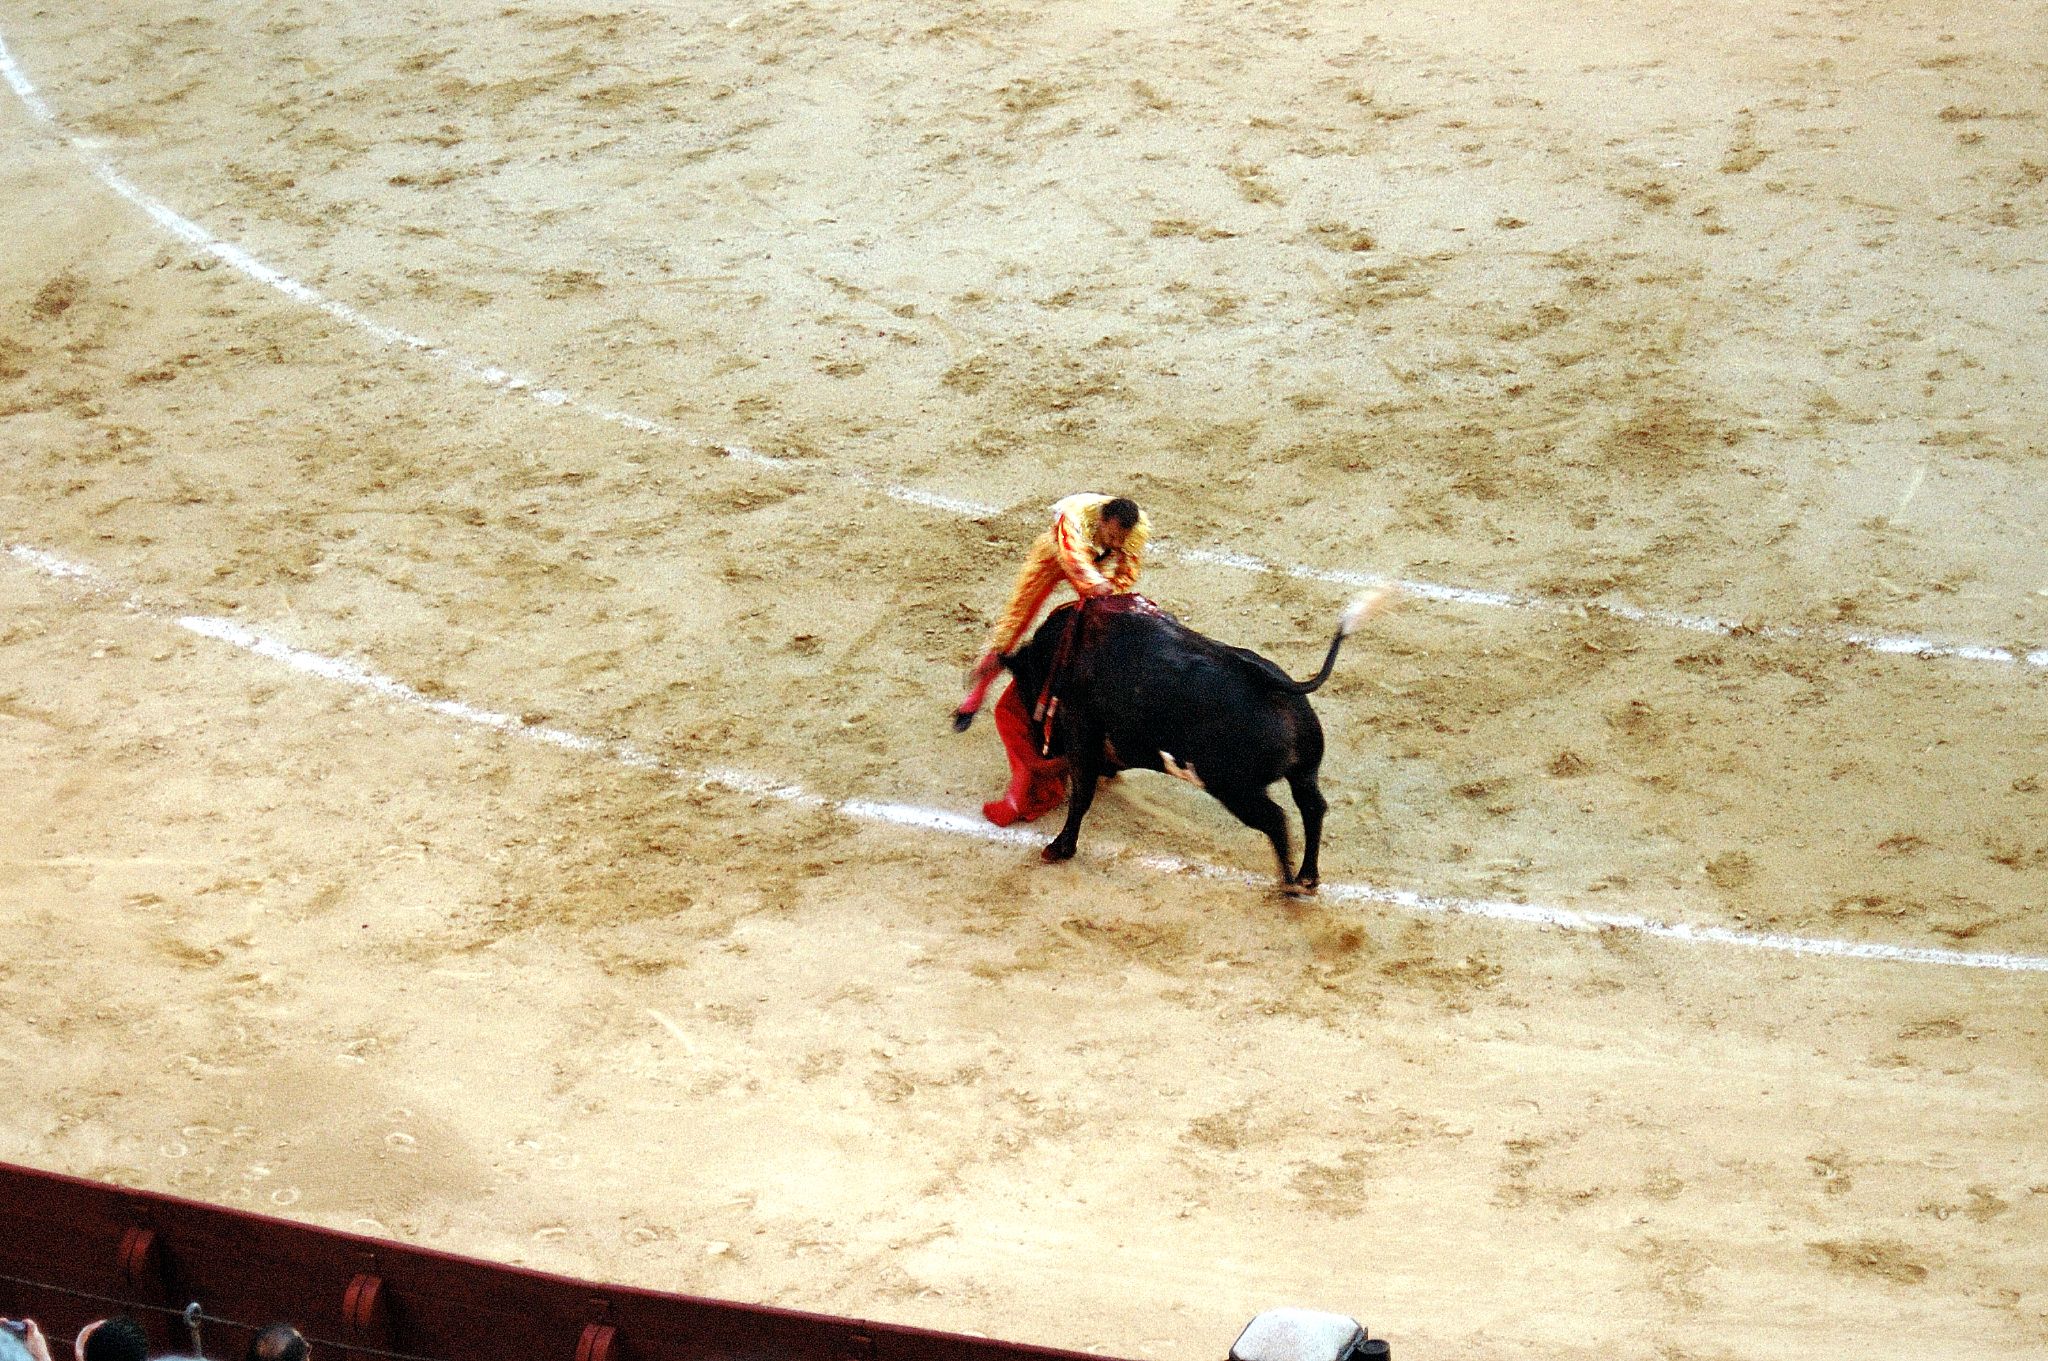 the man is trying to wrestle with the bull